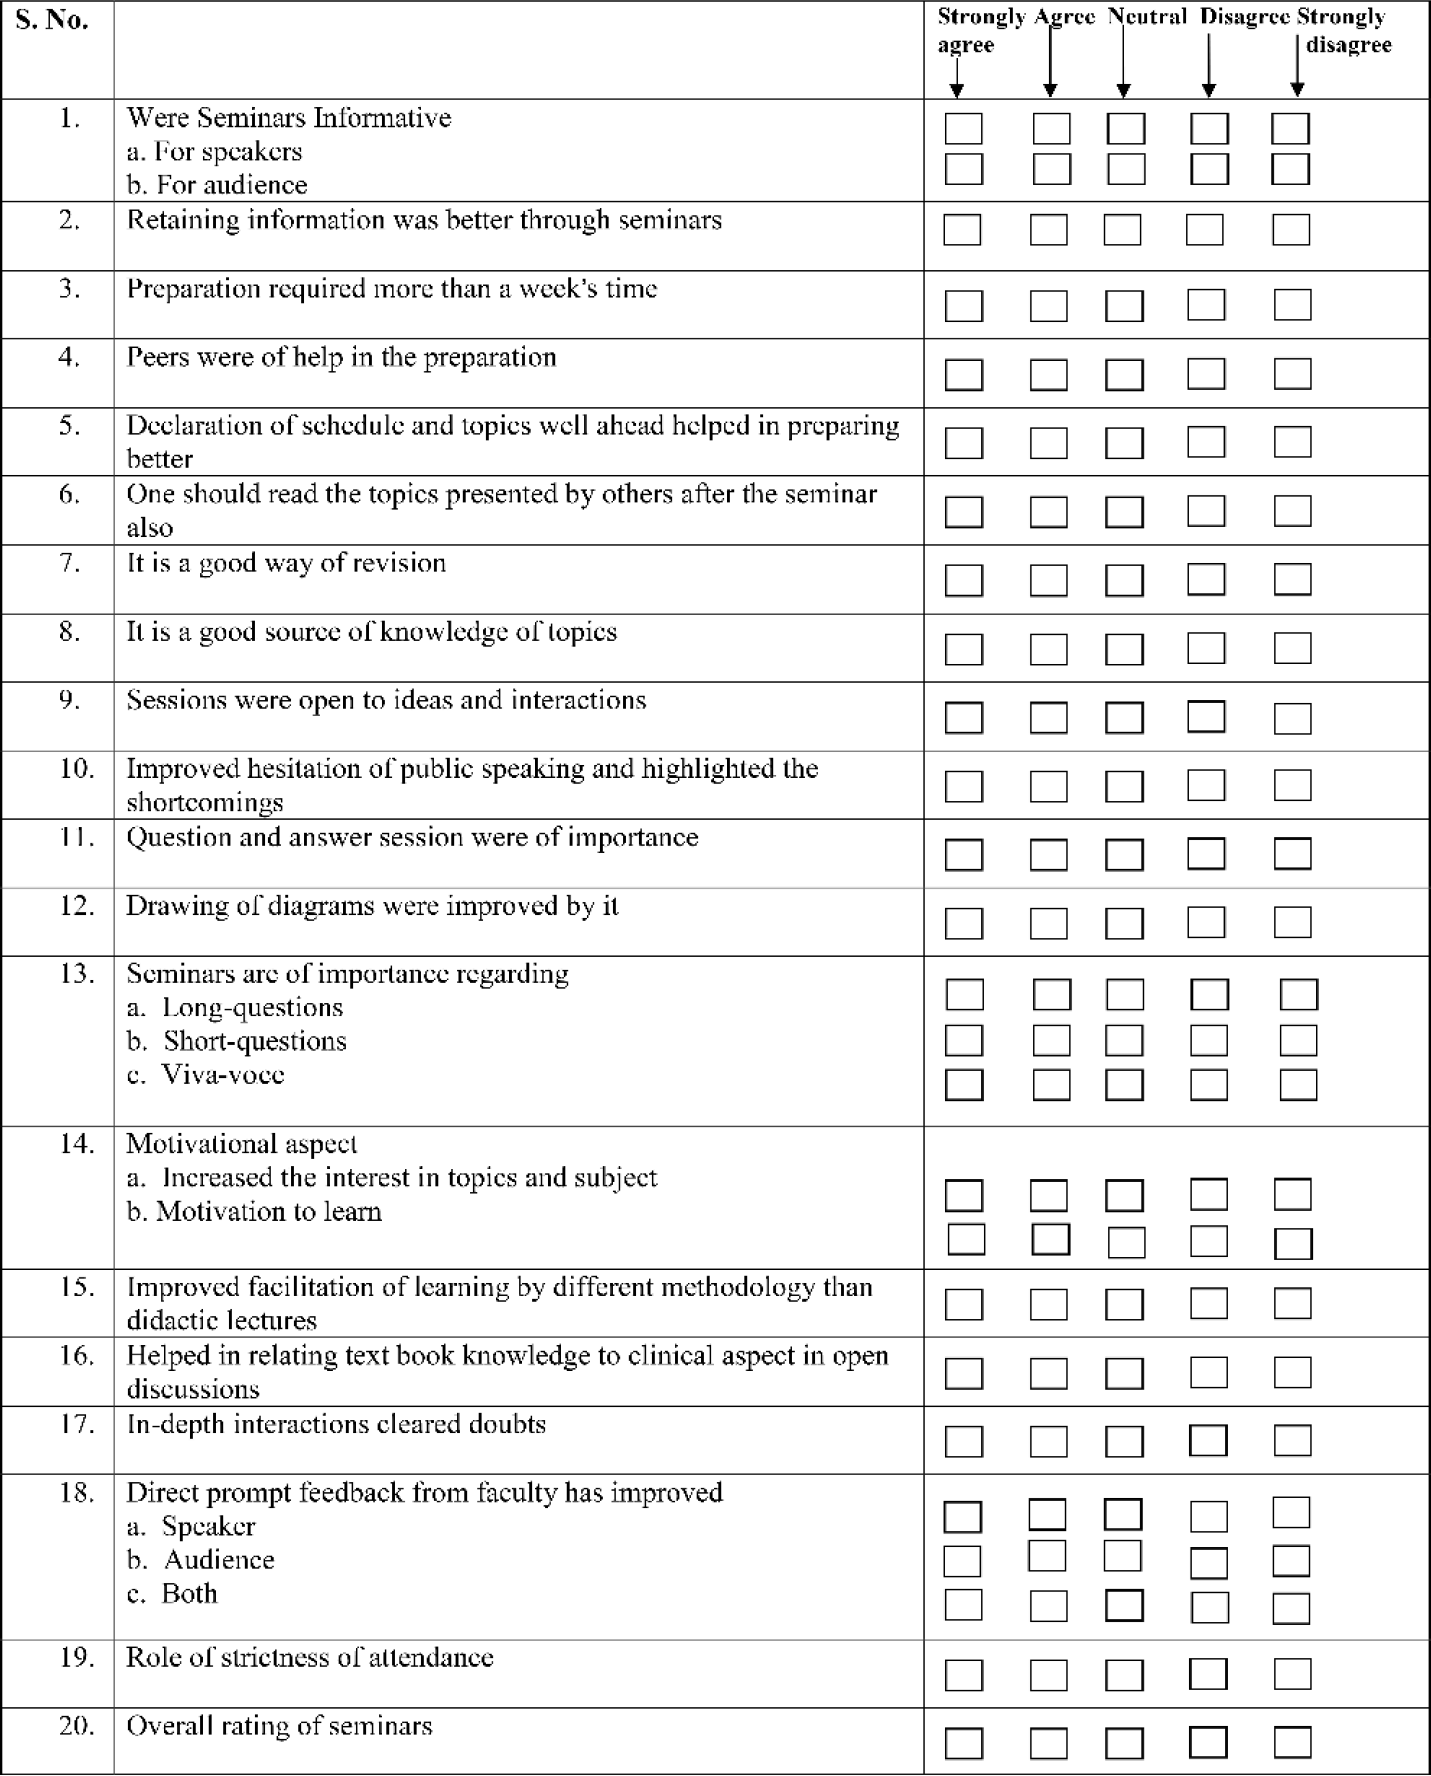 Feedback questionnaire given to the students.